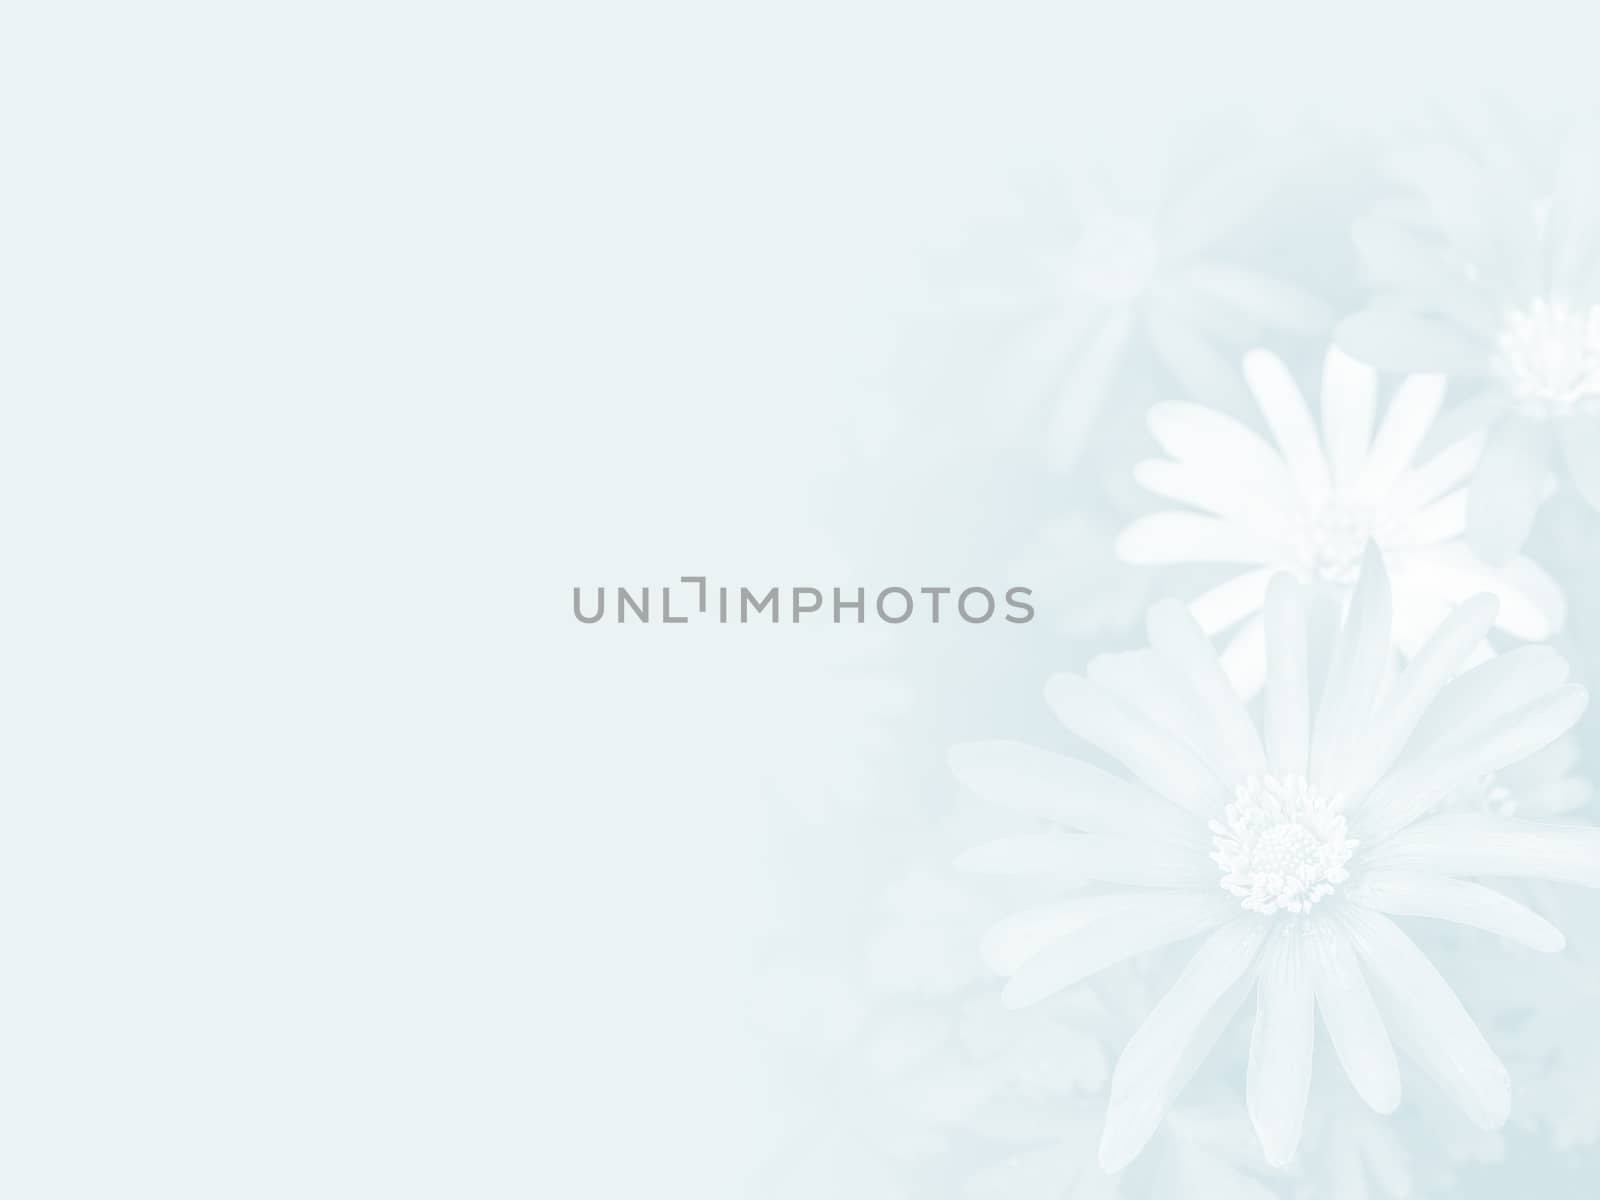 abstract flower background by simpleBE